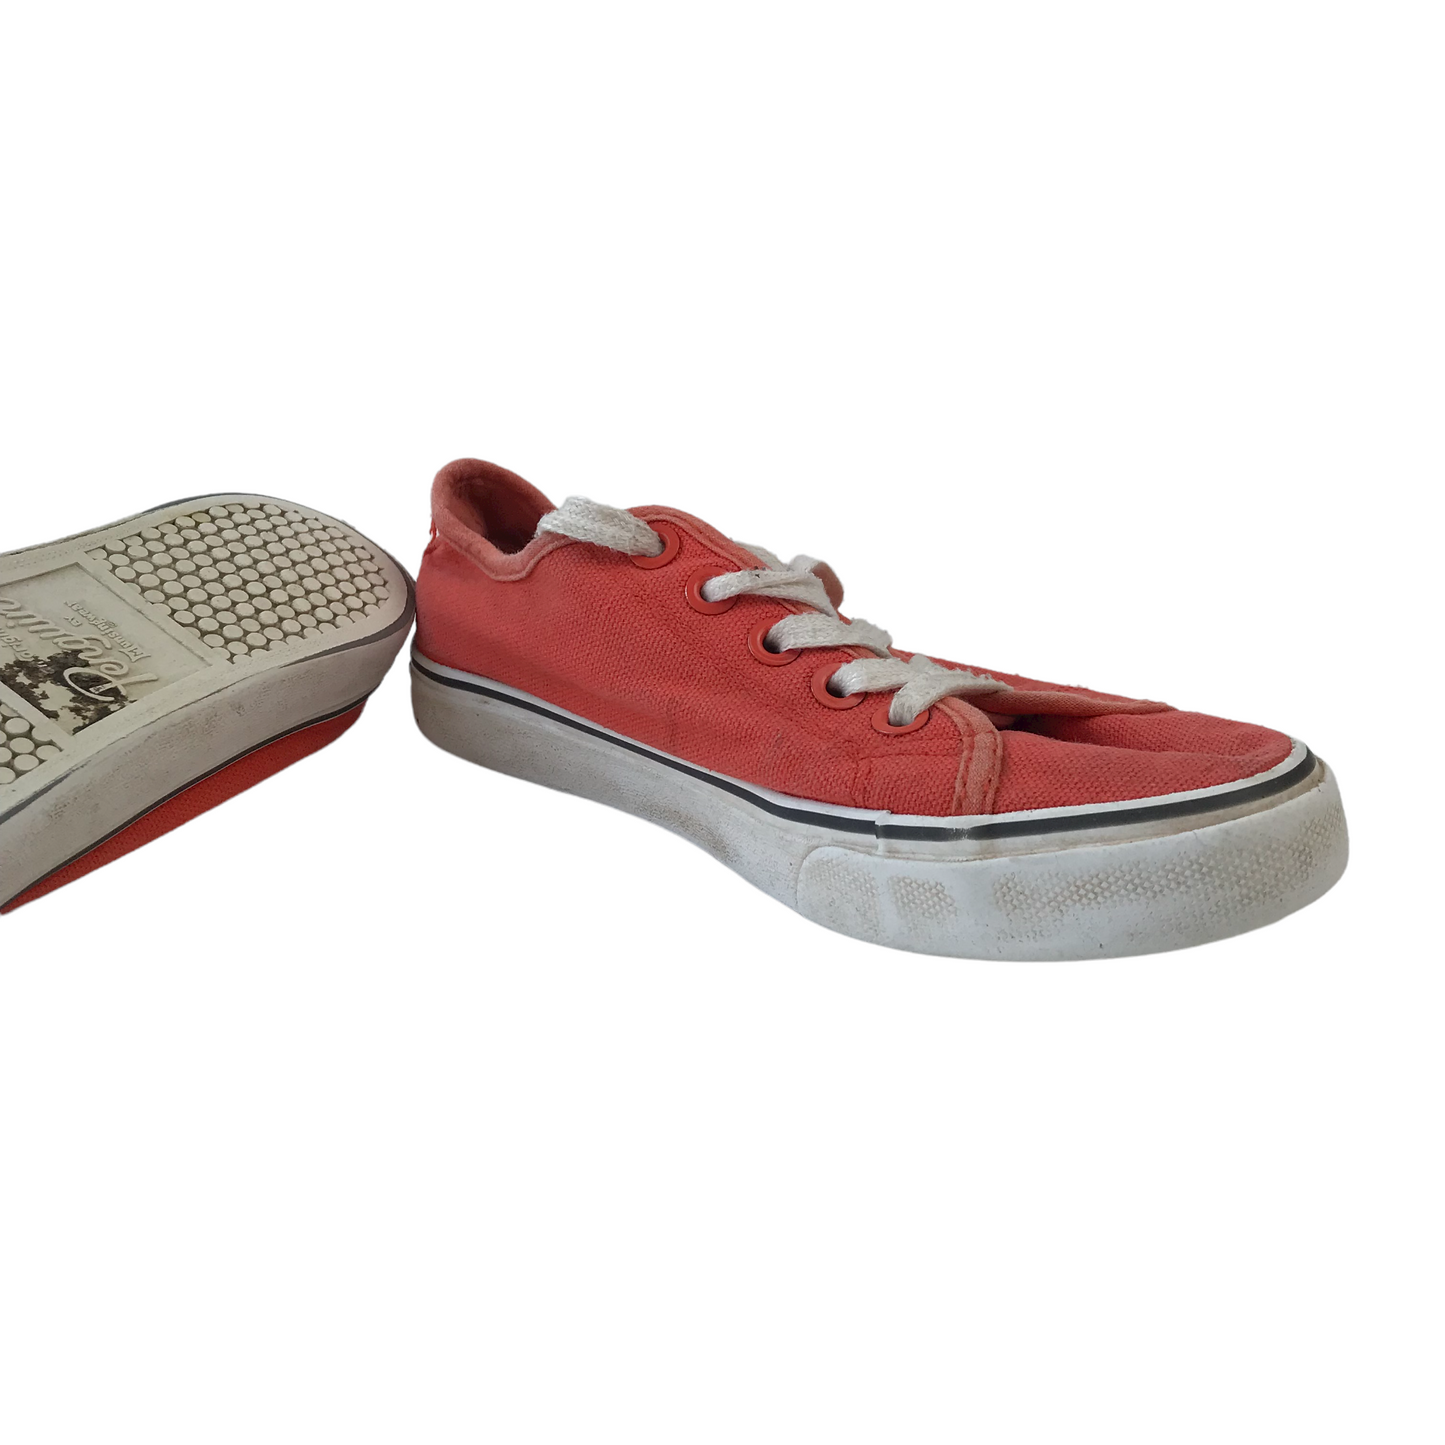 Penguin Red Trainers Shoe Size 1